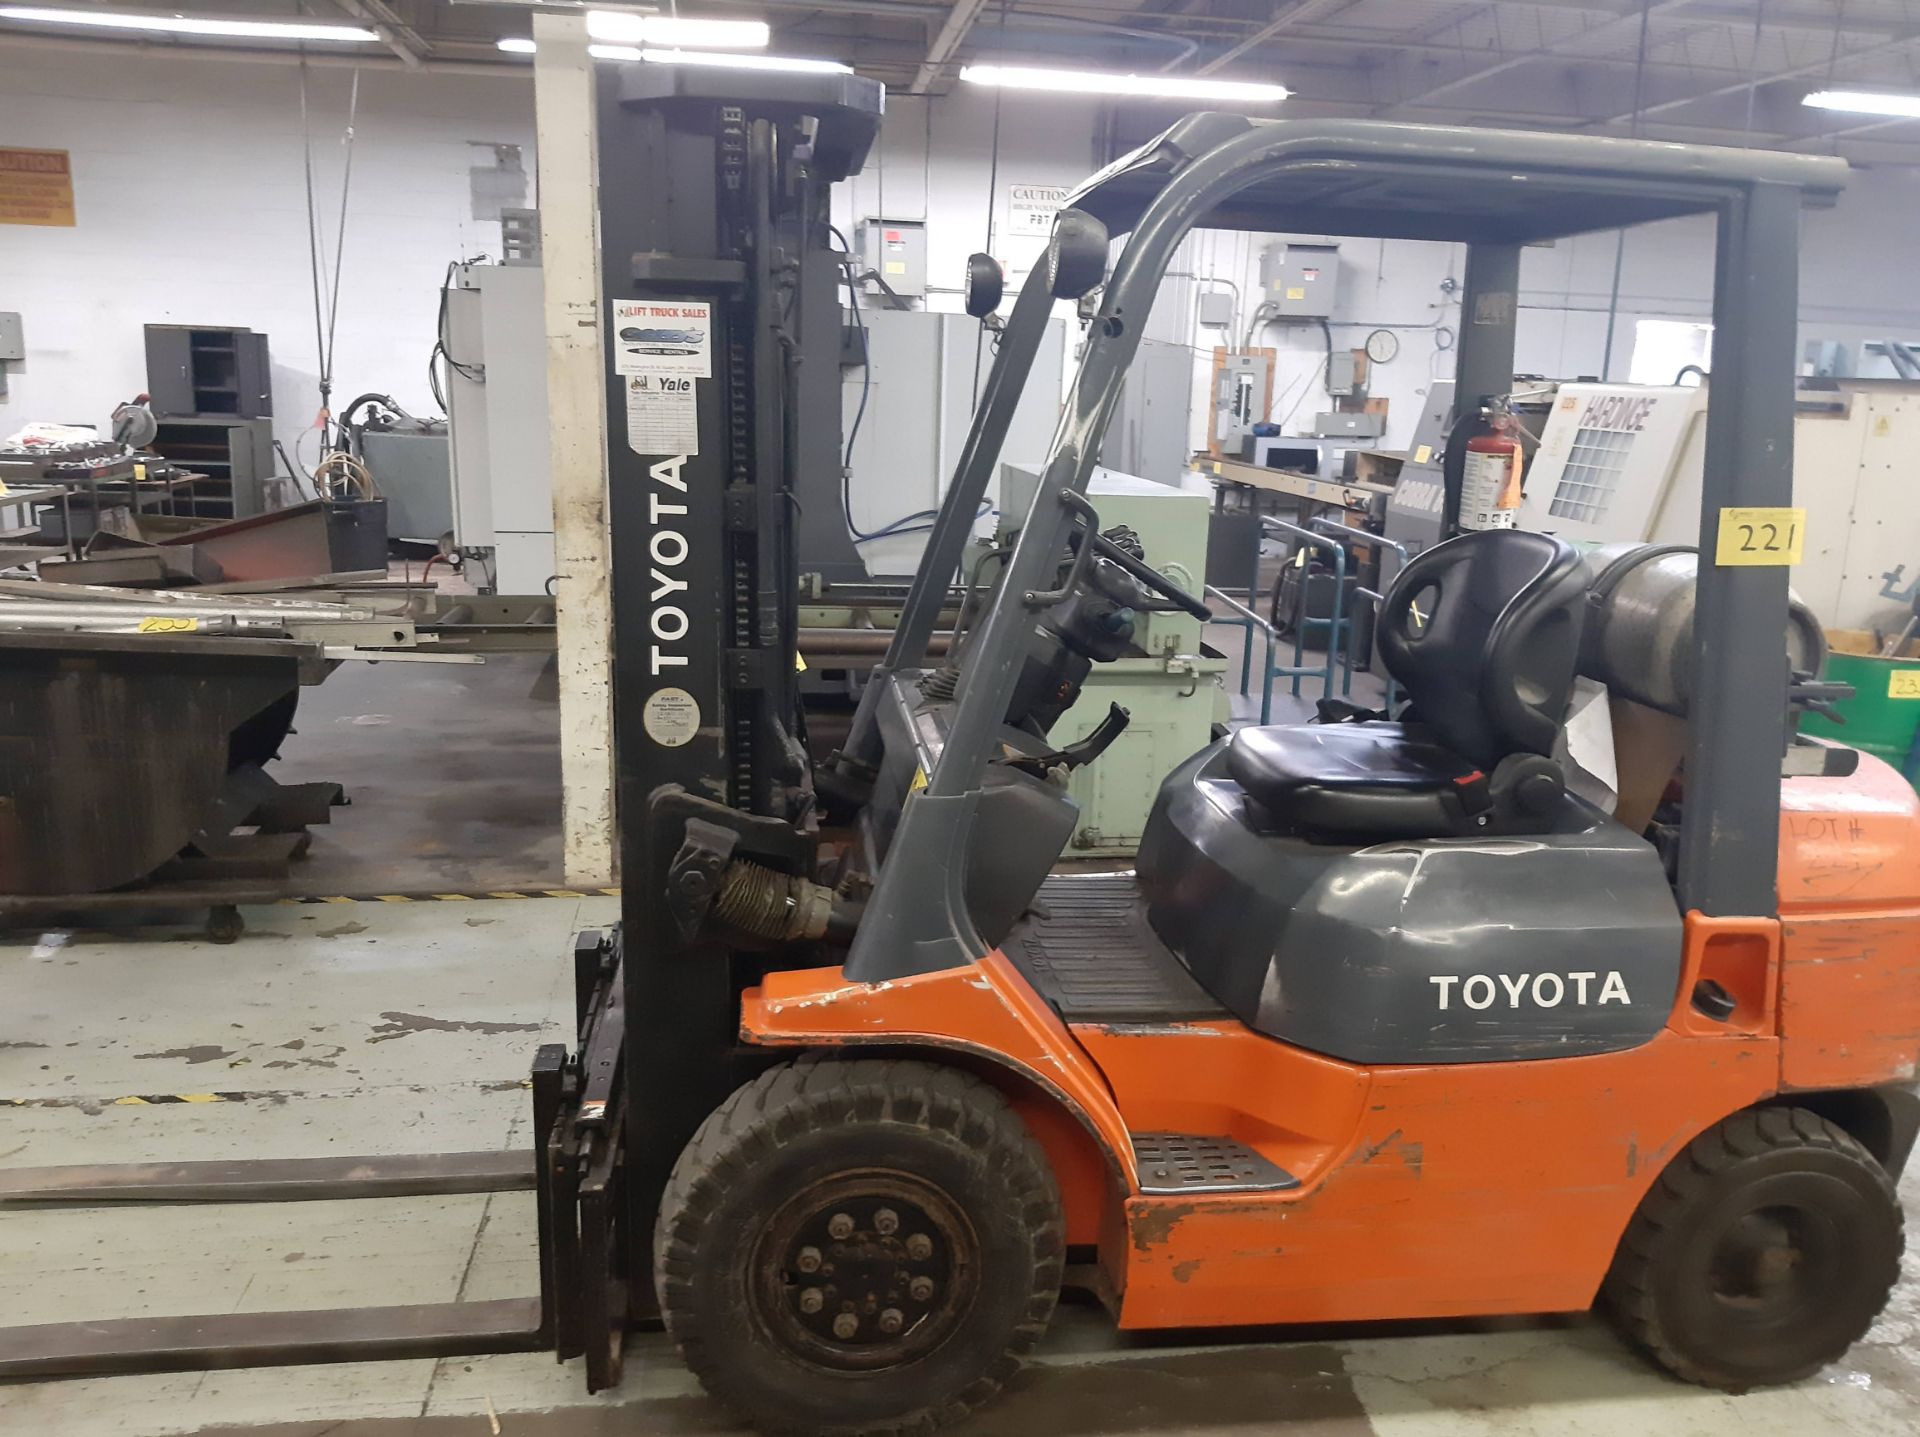 TOYOTA 42-7FG25 PROPANE FORKLIFT, 4,700LB CAP., 185” MAX LIFT, 3-STAGE MAST, SIDE SHIFT, OUTDOOR - Image 5 of 5